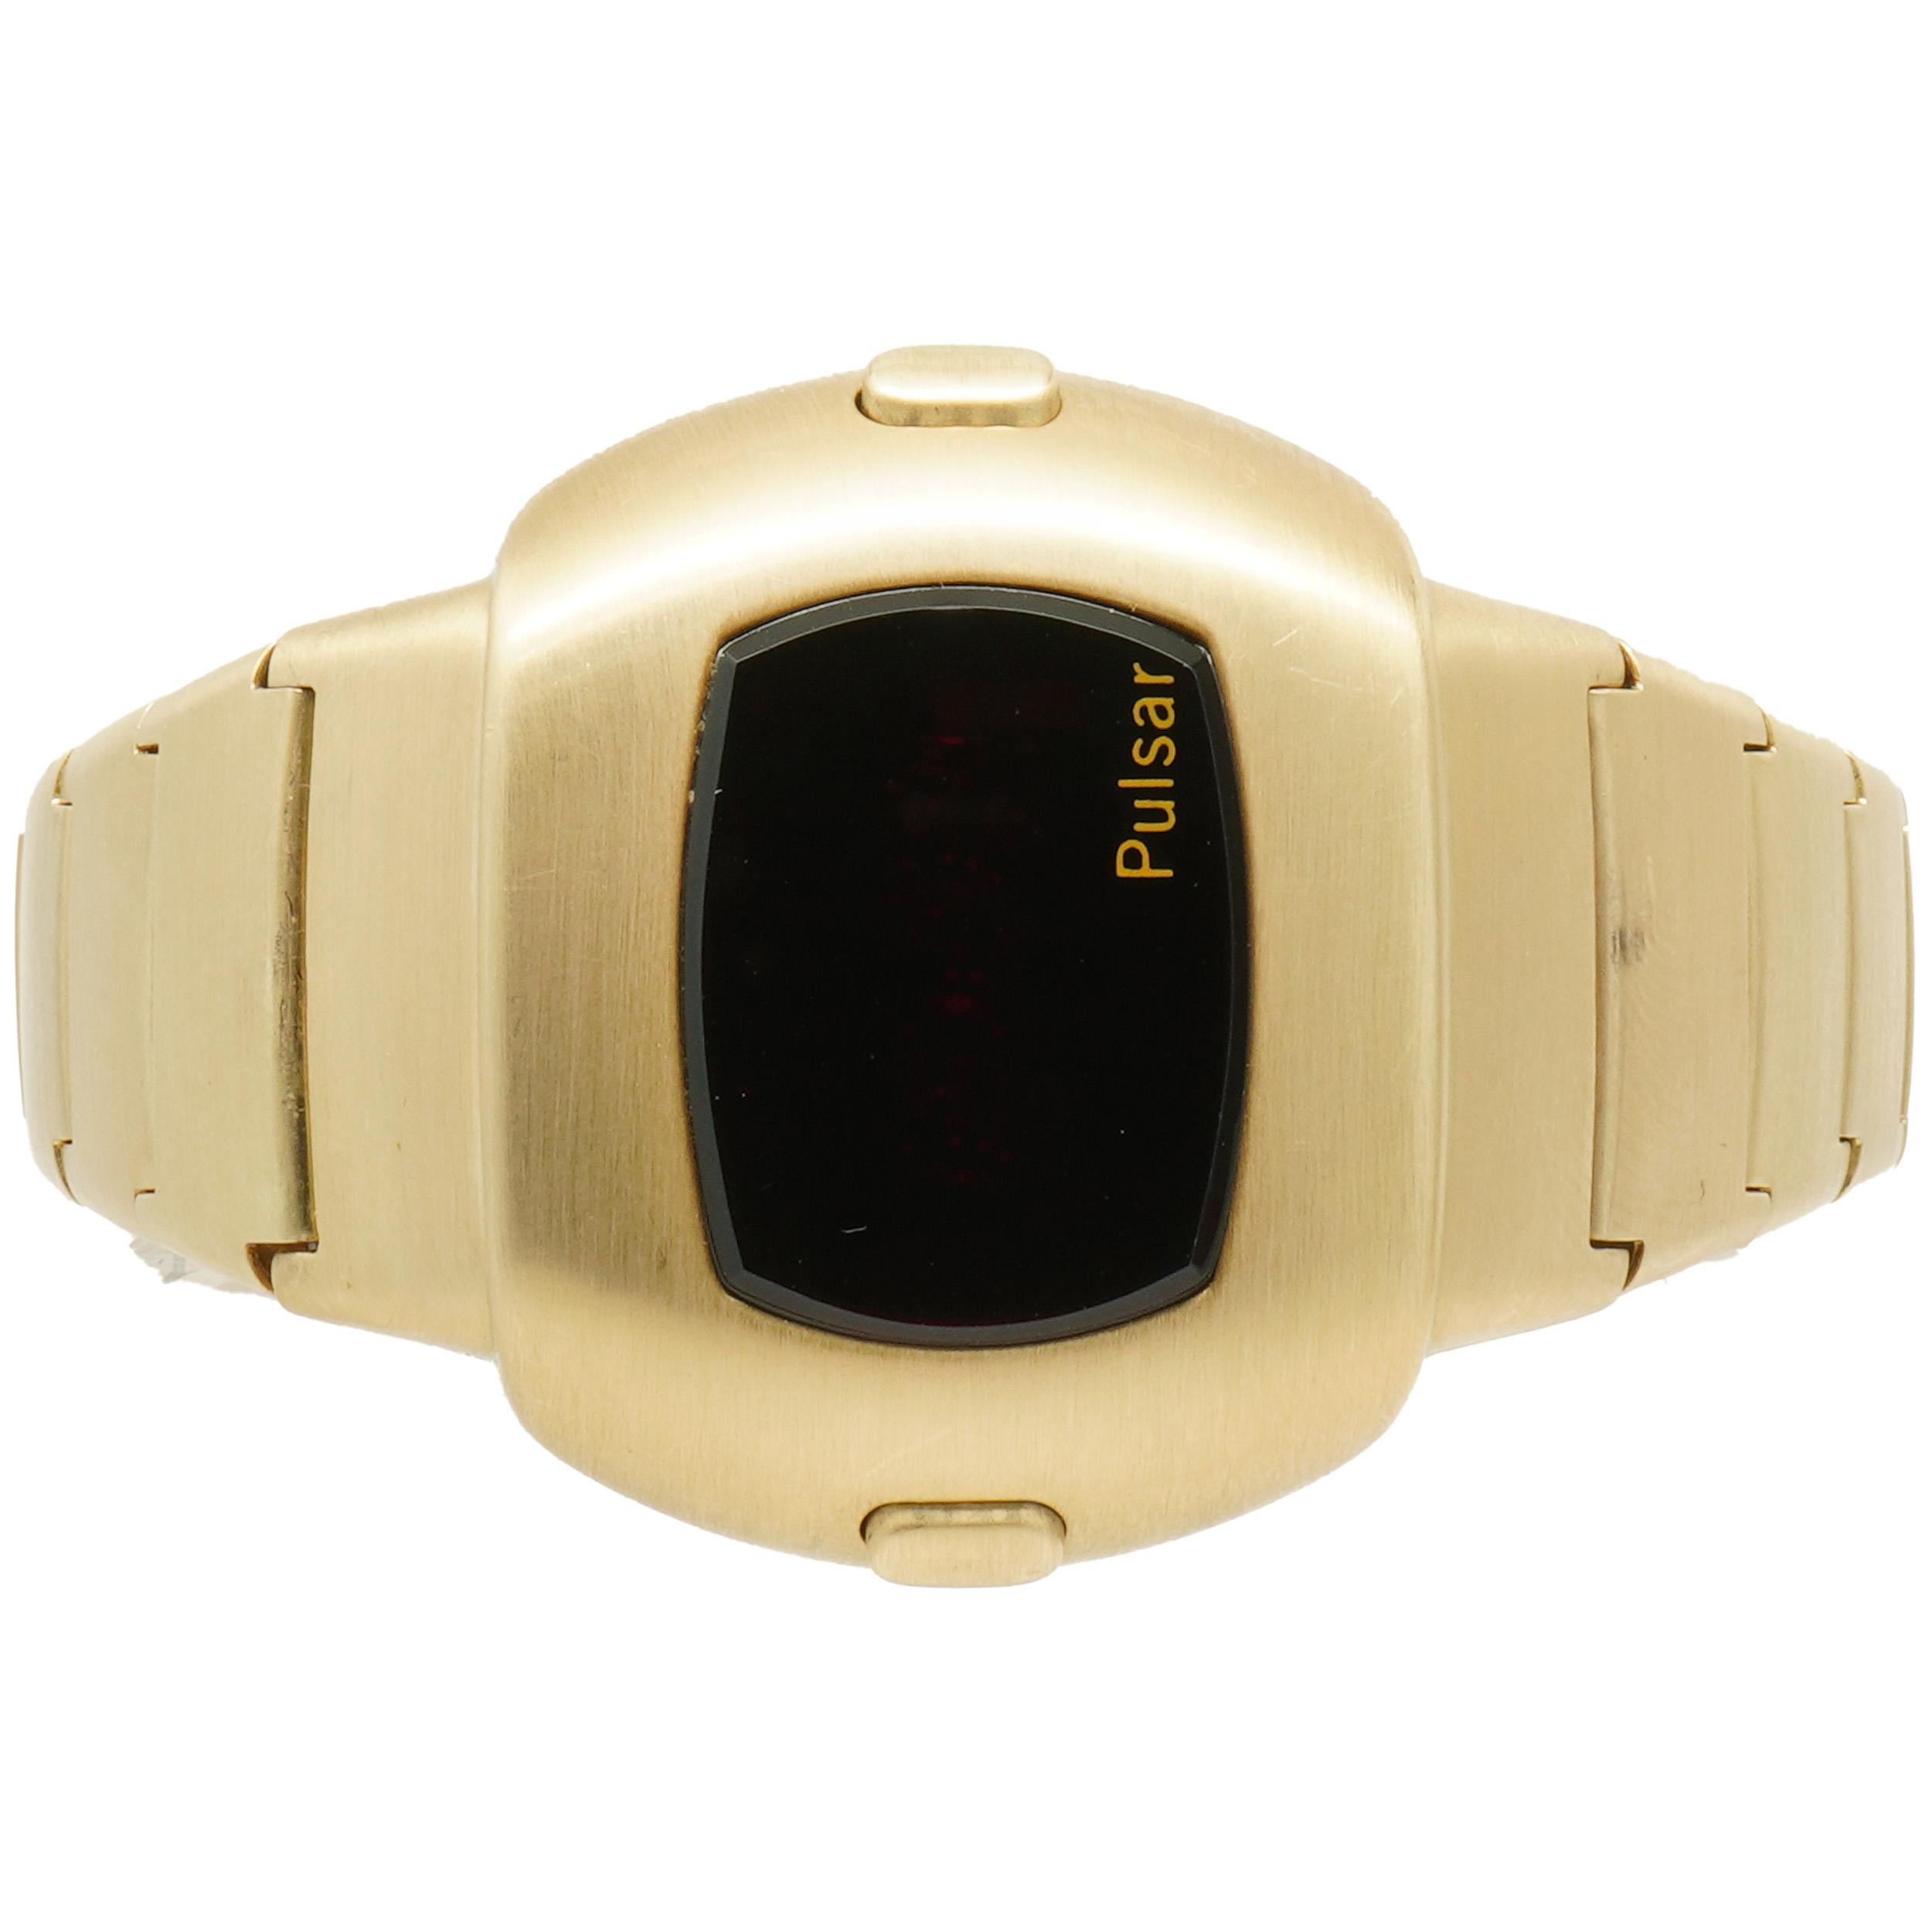 Movement: quartz
Function: Digit display in red LEDS
Case: 41mm 14k yellow gold
Bracelet: 14k yellow gold 
Dial: black
Reference # Pulsar
Serial # 160XXX

No box or papers
